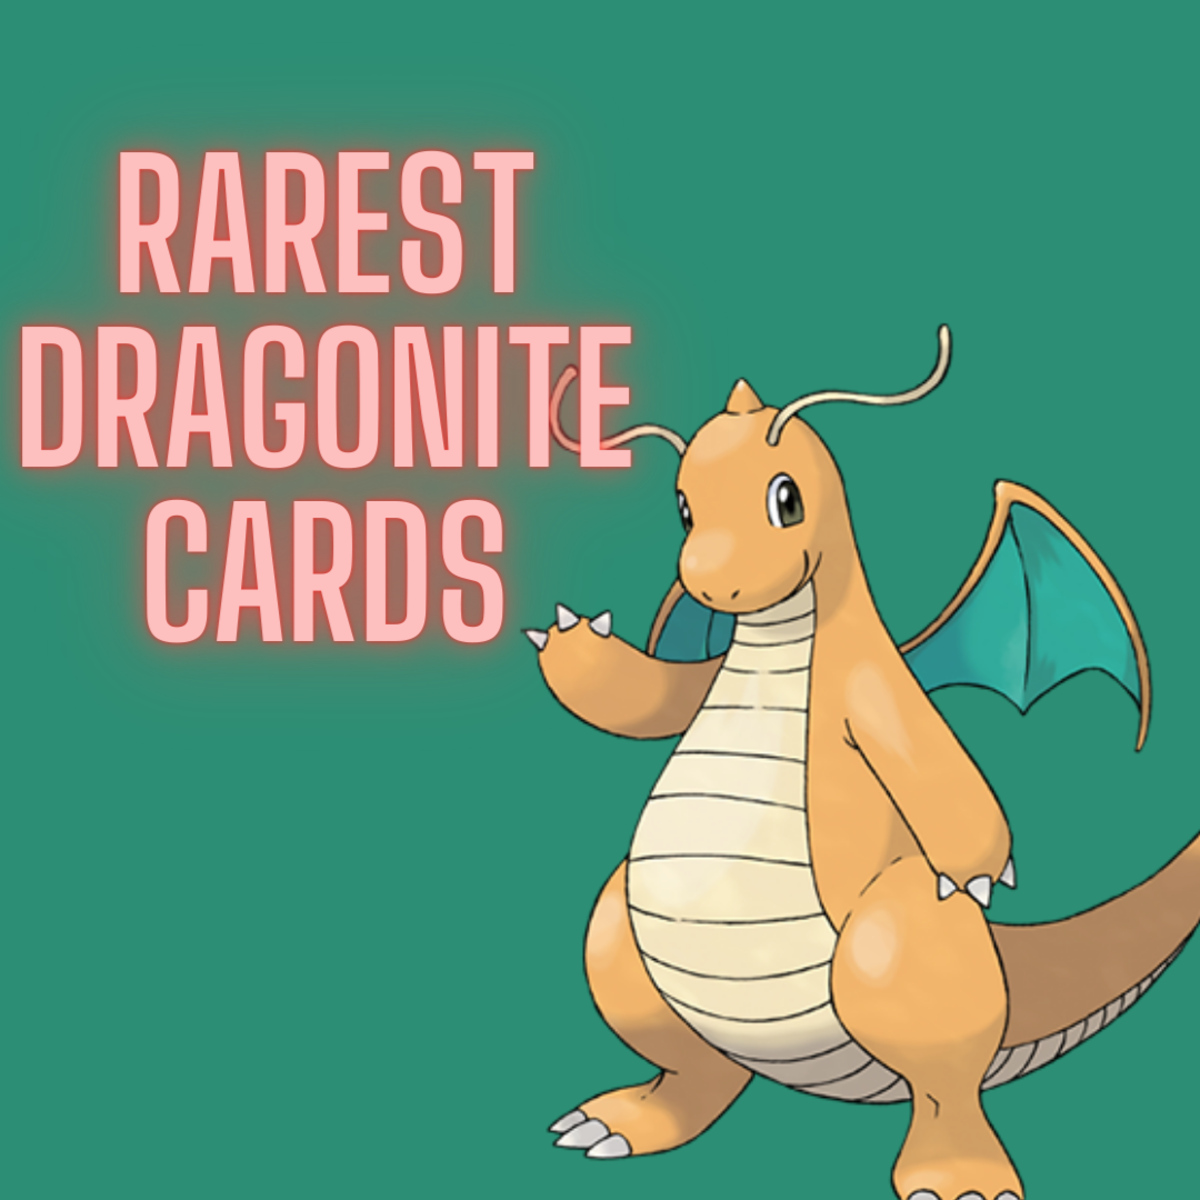 Pokémon TCG: 5 of the Rarest and Most Valuable Dragonite Cards